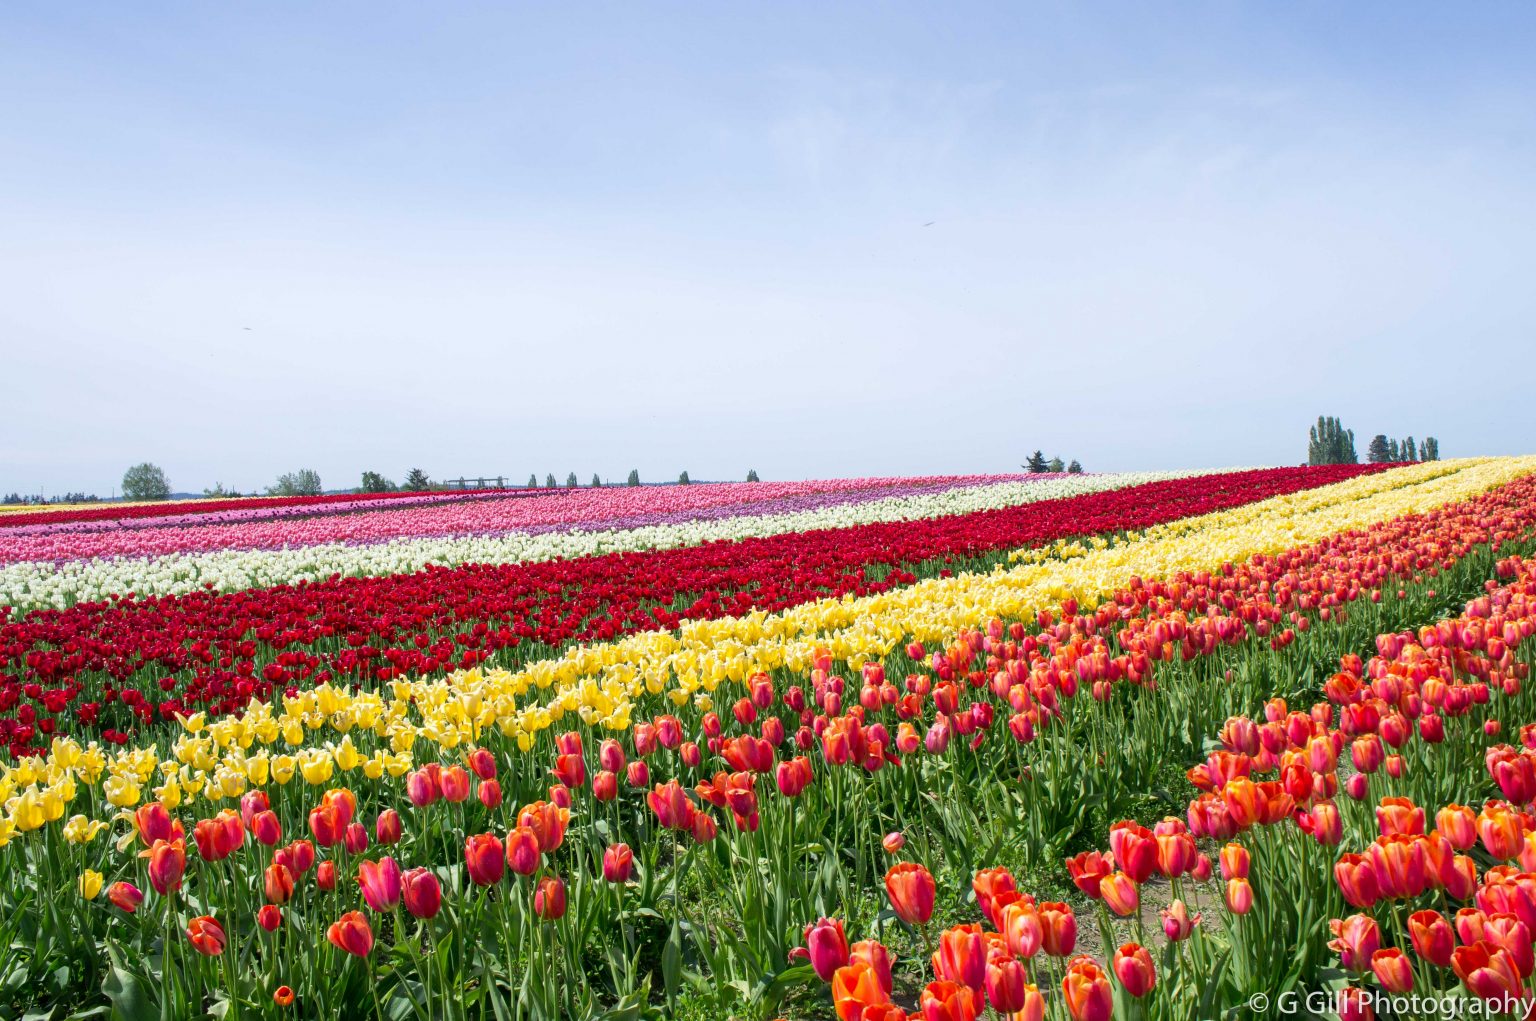 Skagit Valley Tulip Festival Joy of Exploring The Scenic Country Drive